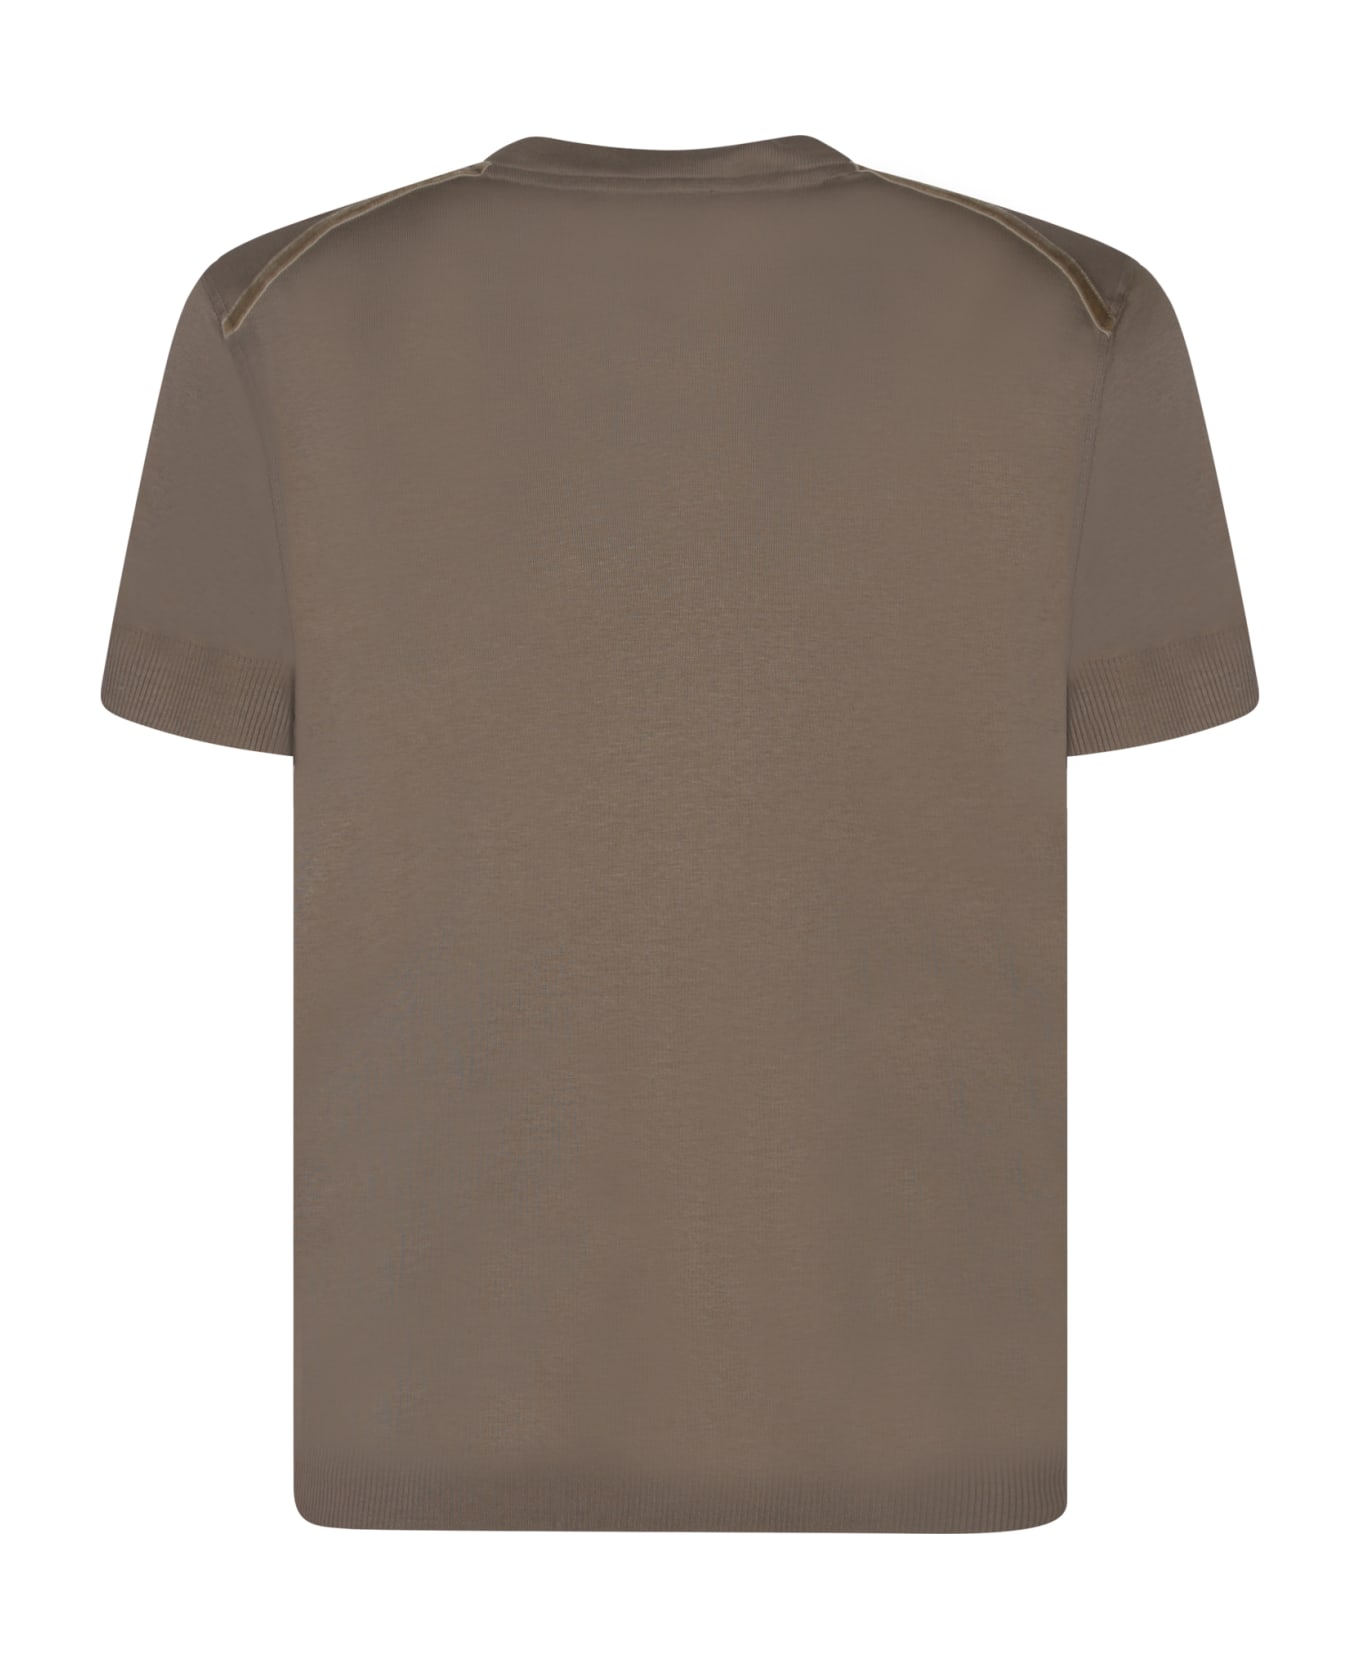 Tom Ford Ribbed Military Green T-shirt - Green シャツ